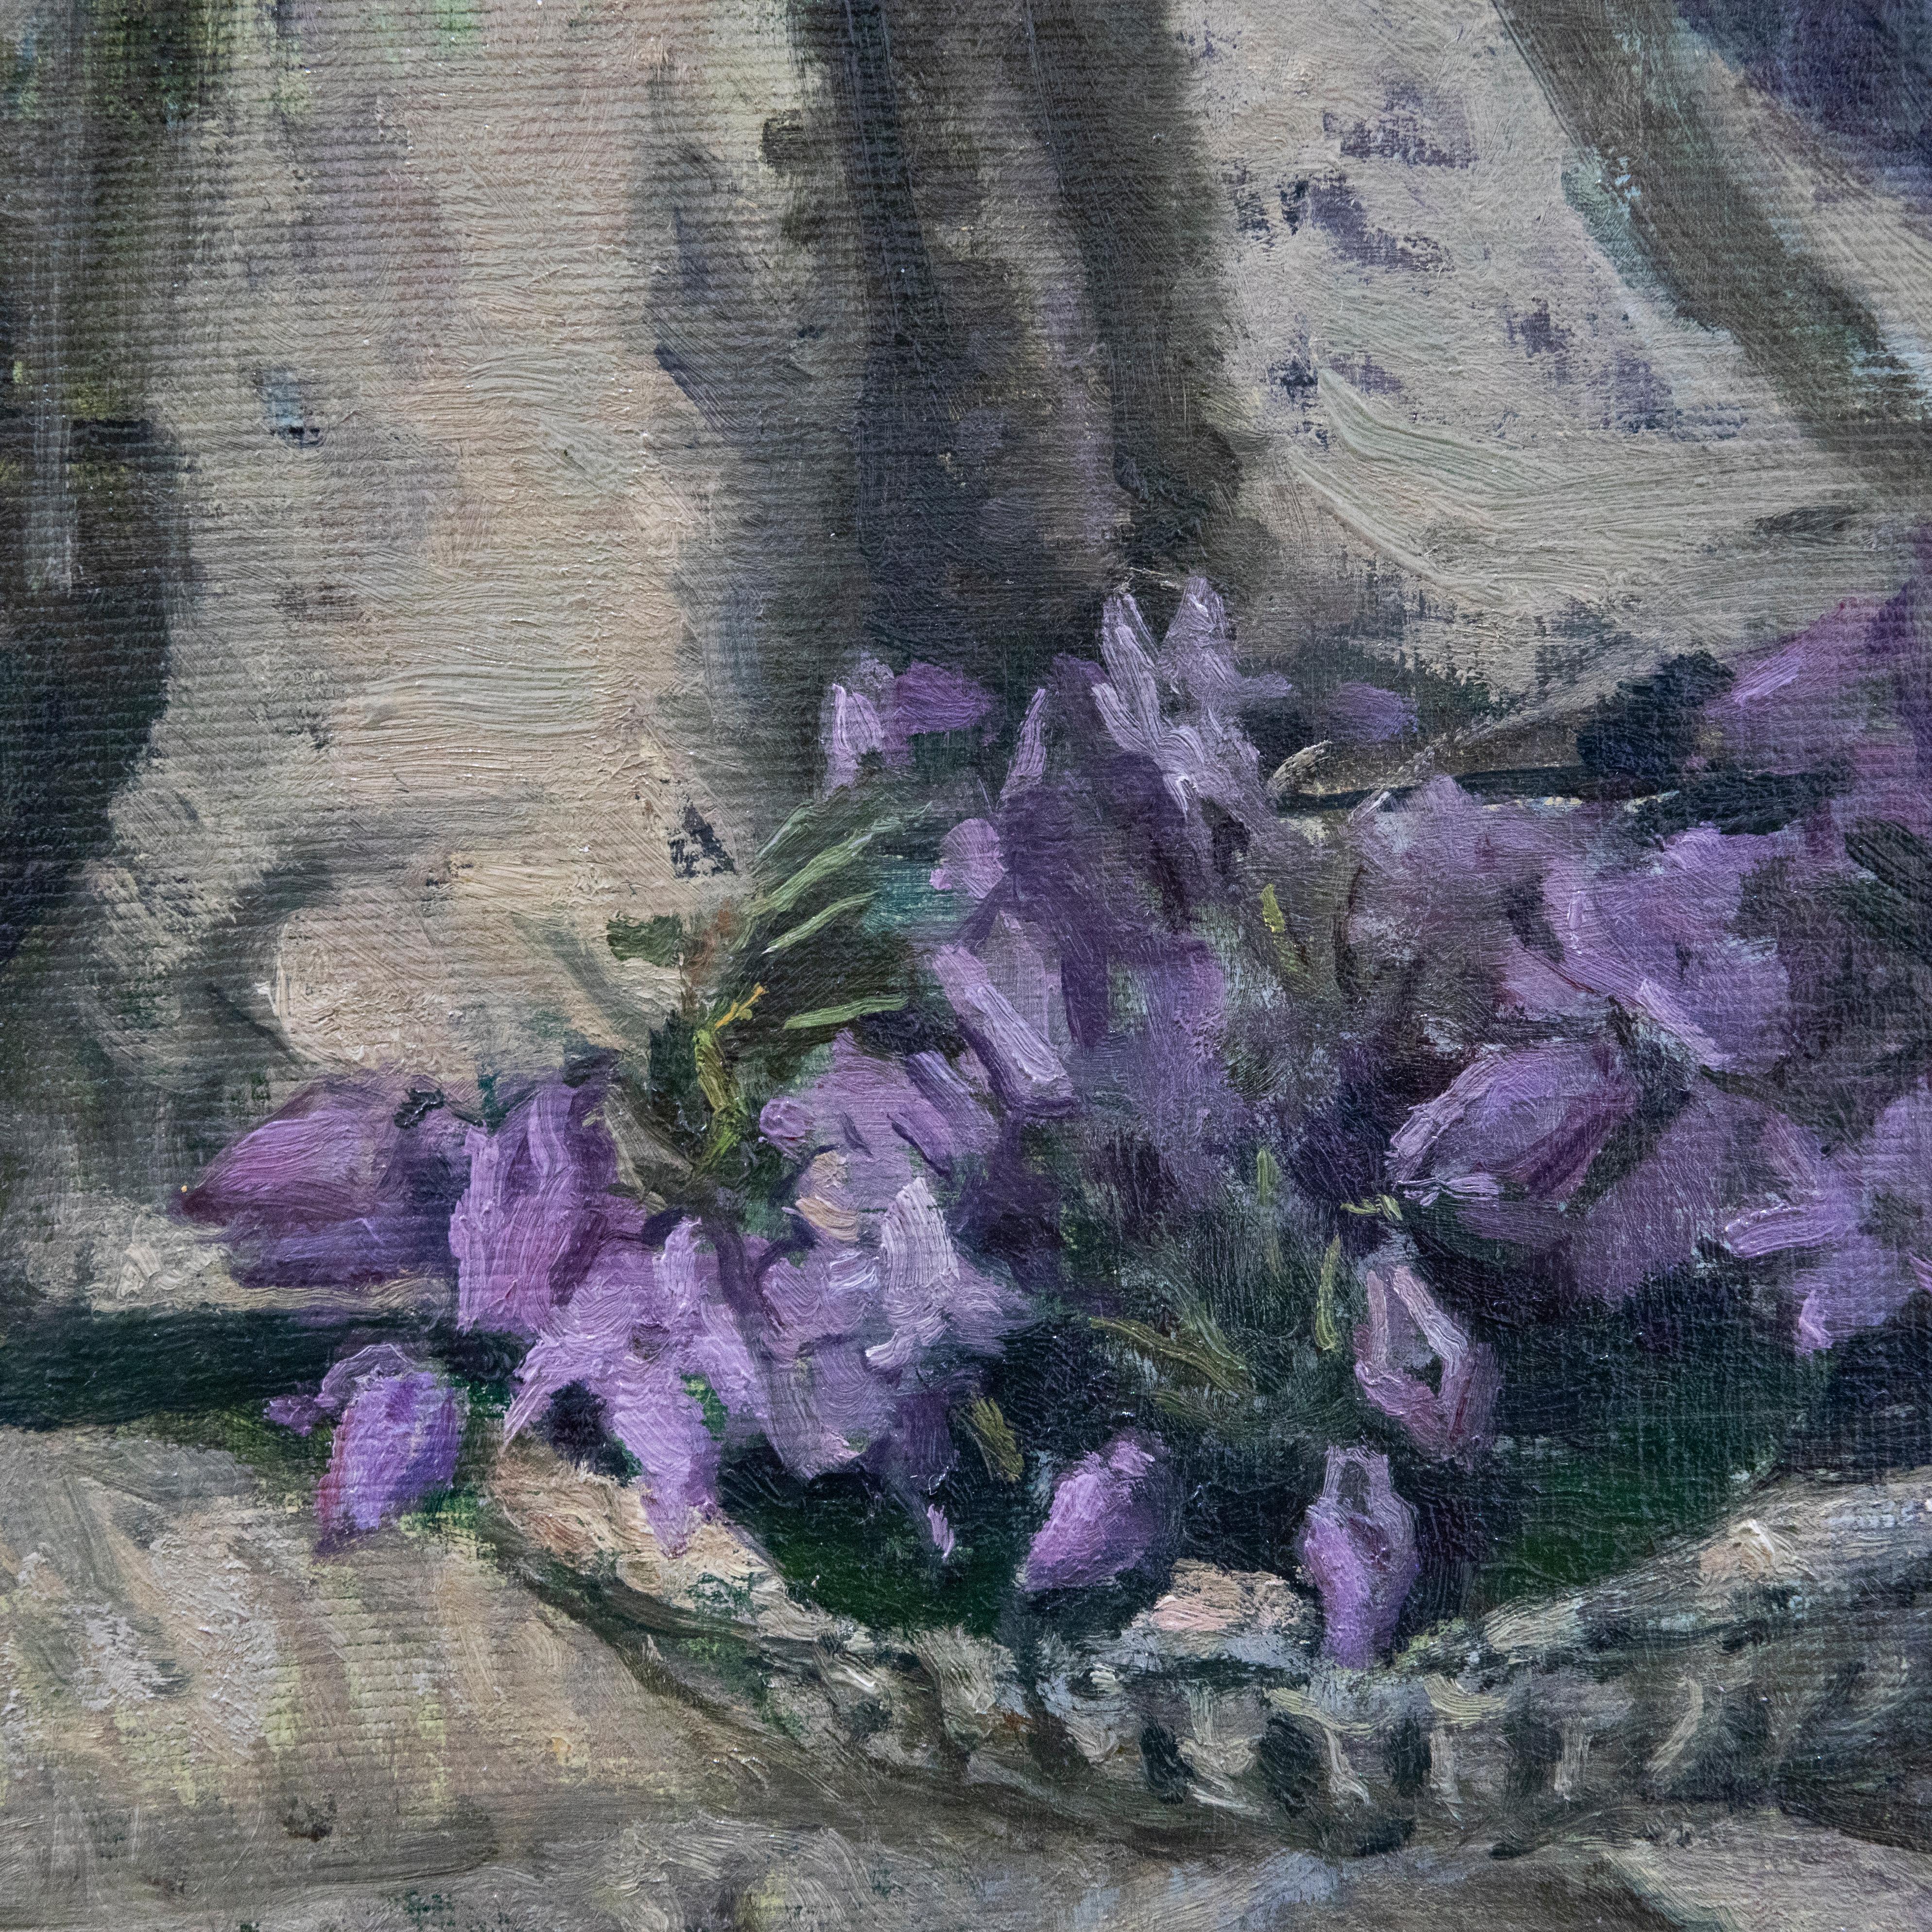 A particularly fine impressionistic study of purple violets in a scalloped dish, precariously placed on a wooden chair with floral drape. Well-presented in a contemporary silver-effect frame. Signed to the upper left. On canvas board. 